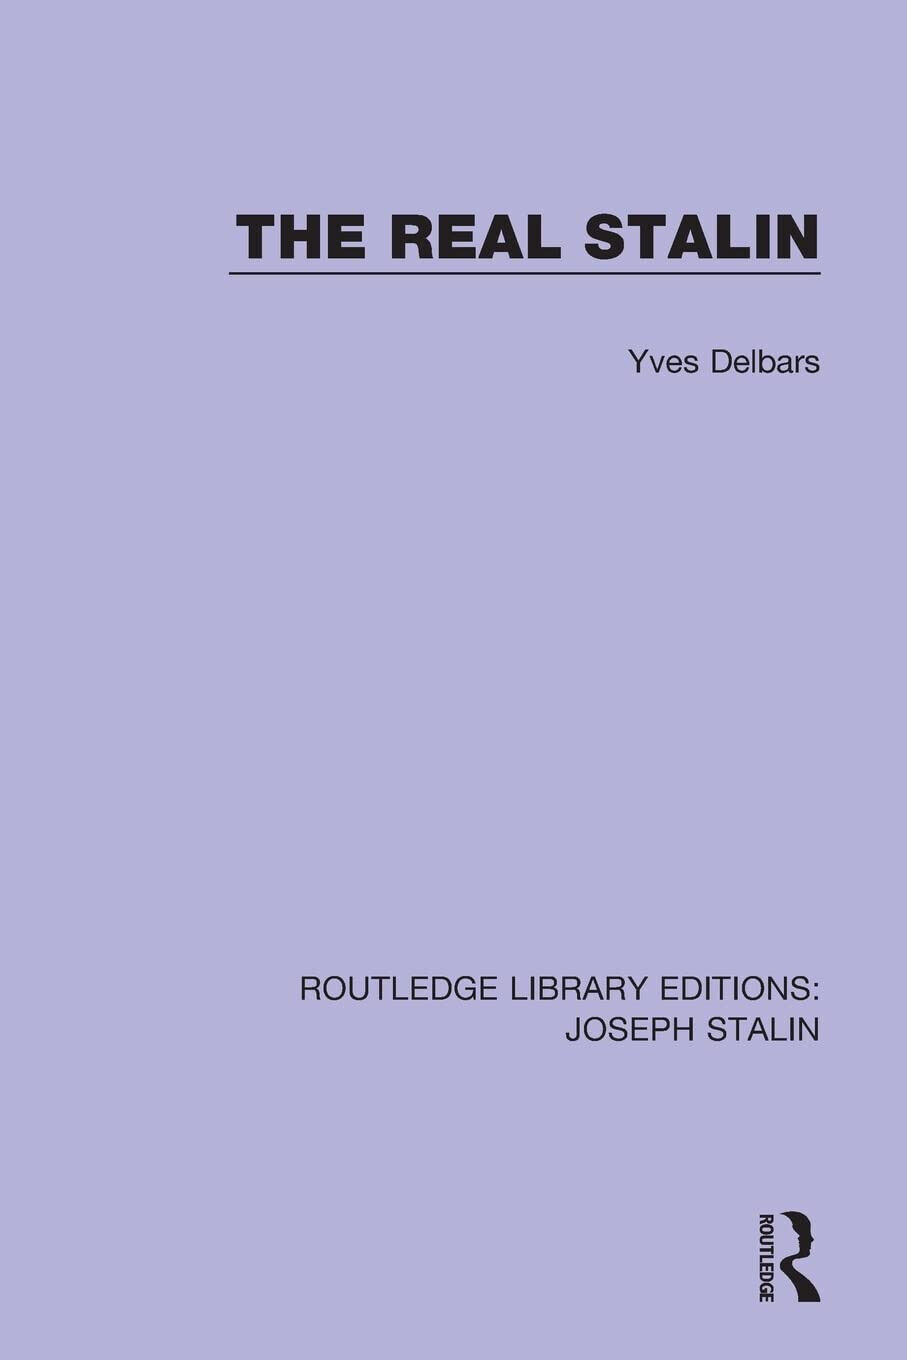 The Real Stalin - Yves Delbars - Routledge, 2019